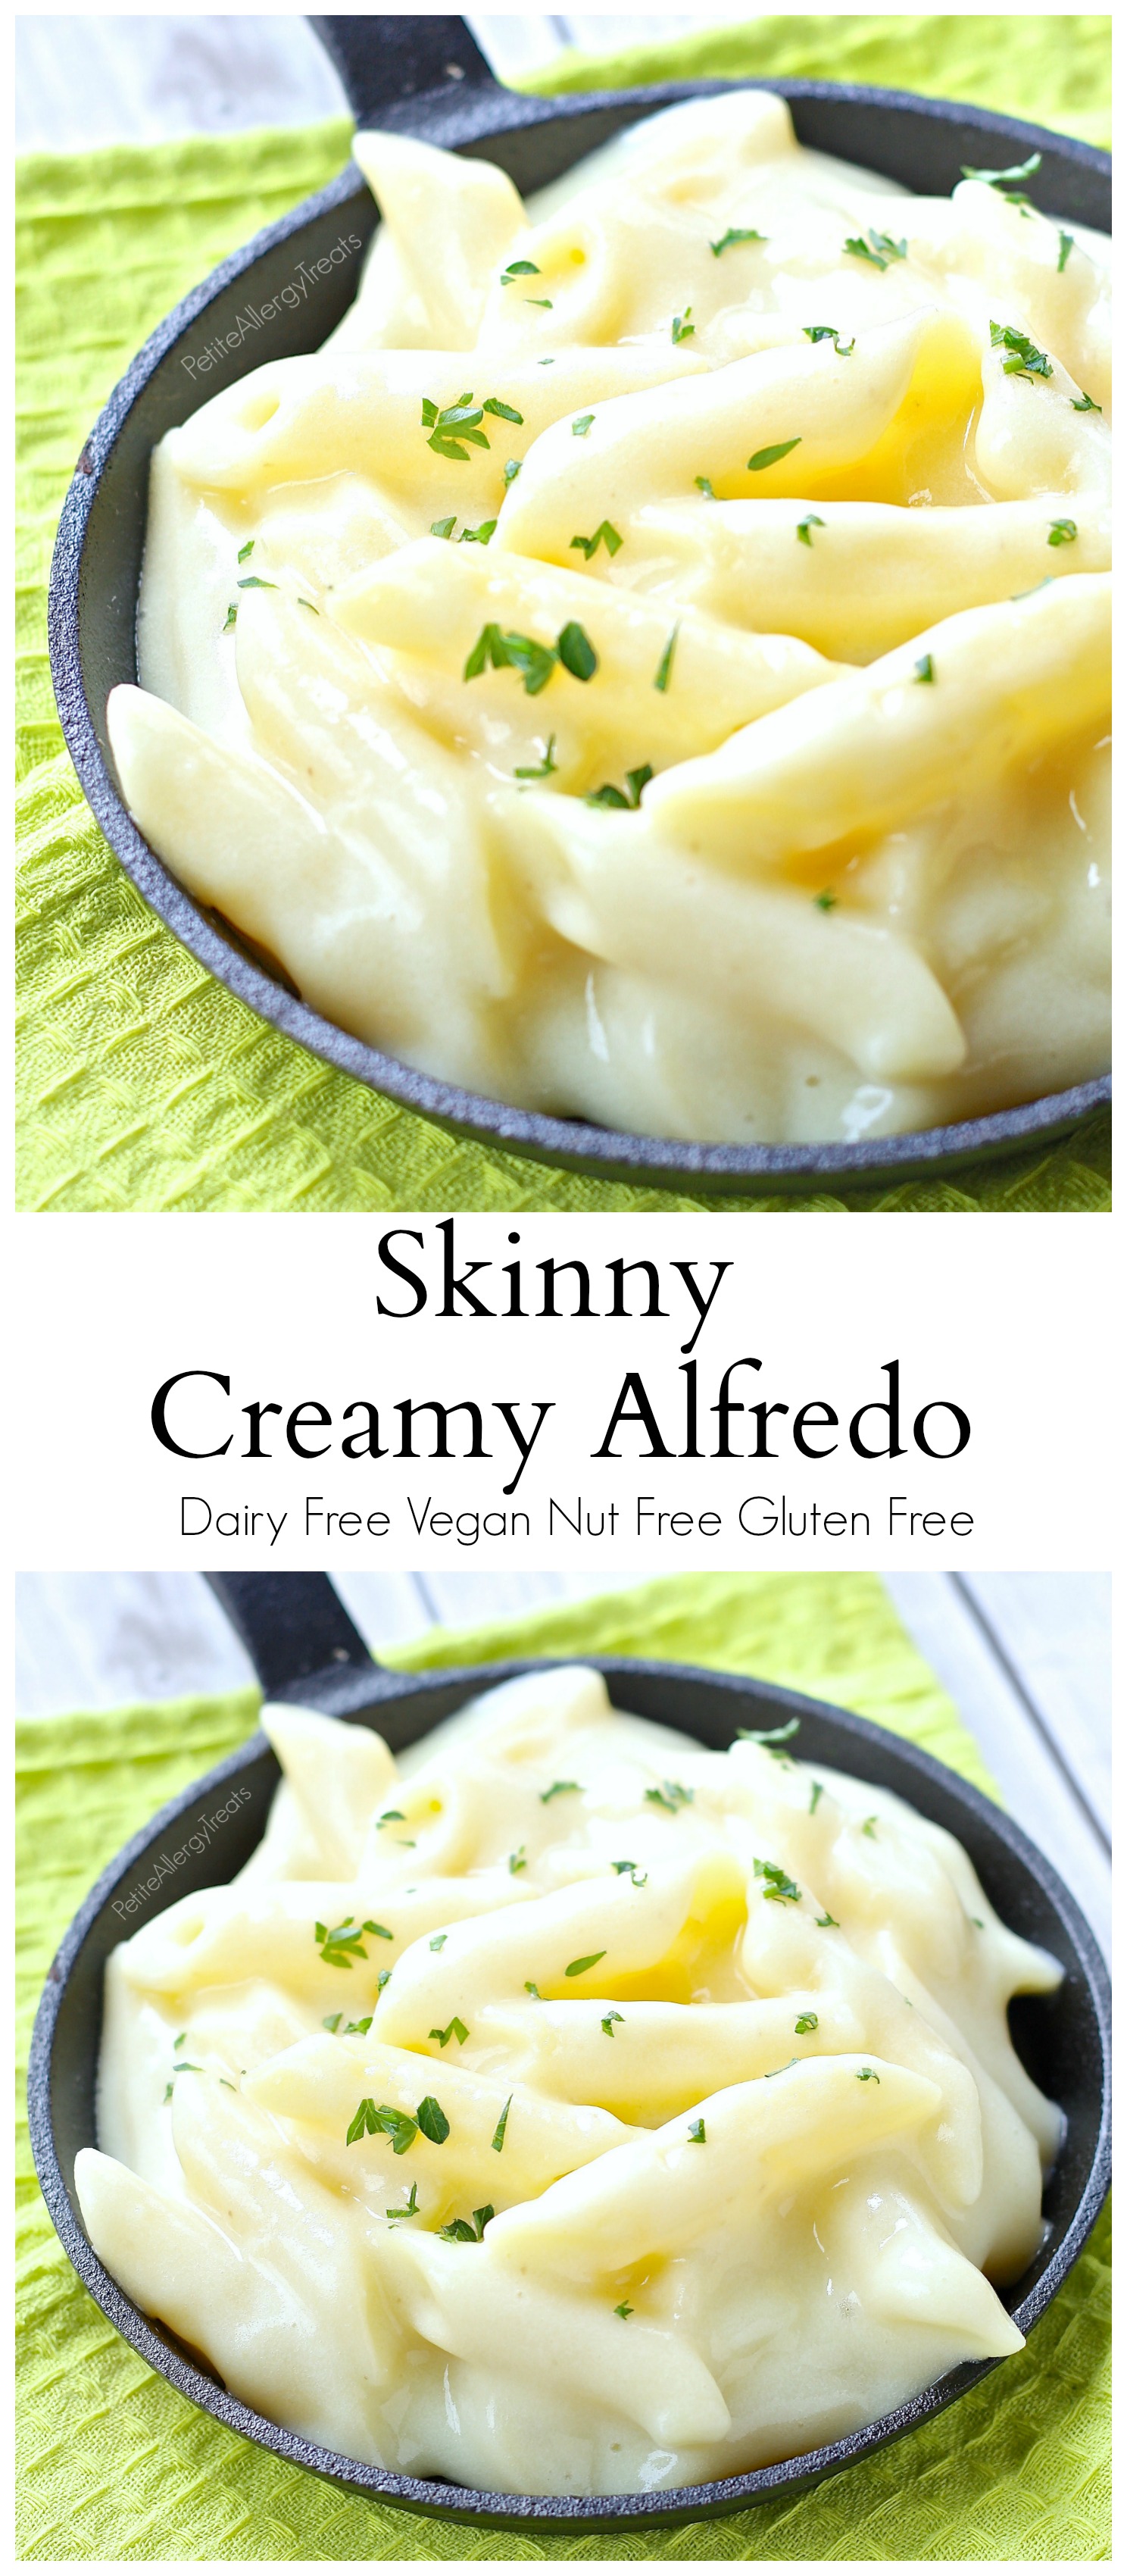 Healthy Creamy Alfredo Sauce (dairy free, nut free Vegan)  Made with gluten free pasta this easy sauce uses potato to make it super creamy and light. No added oil.